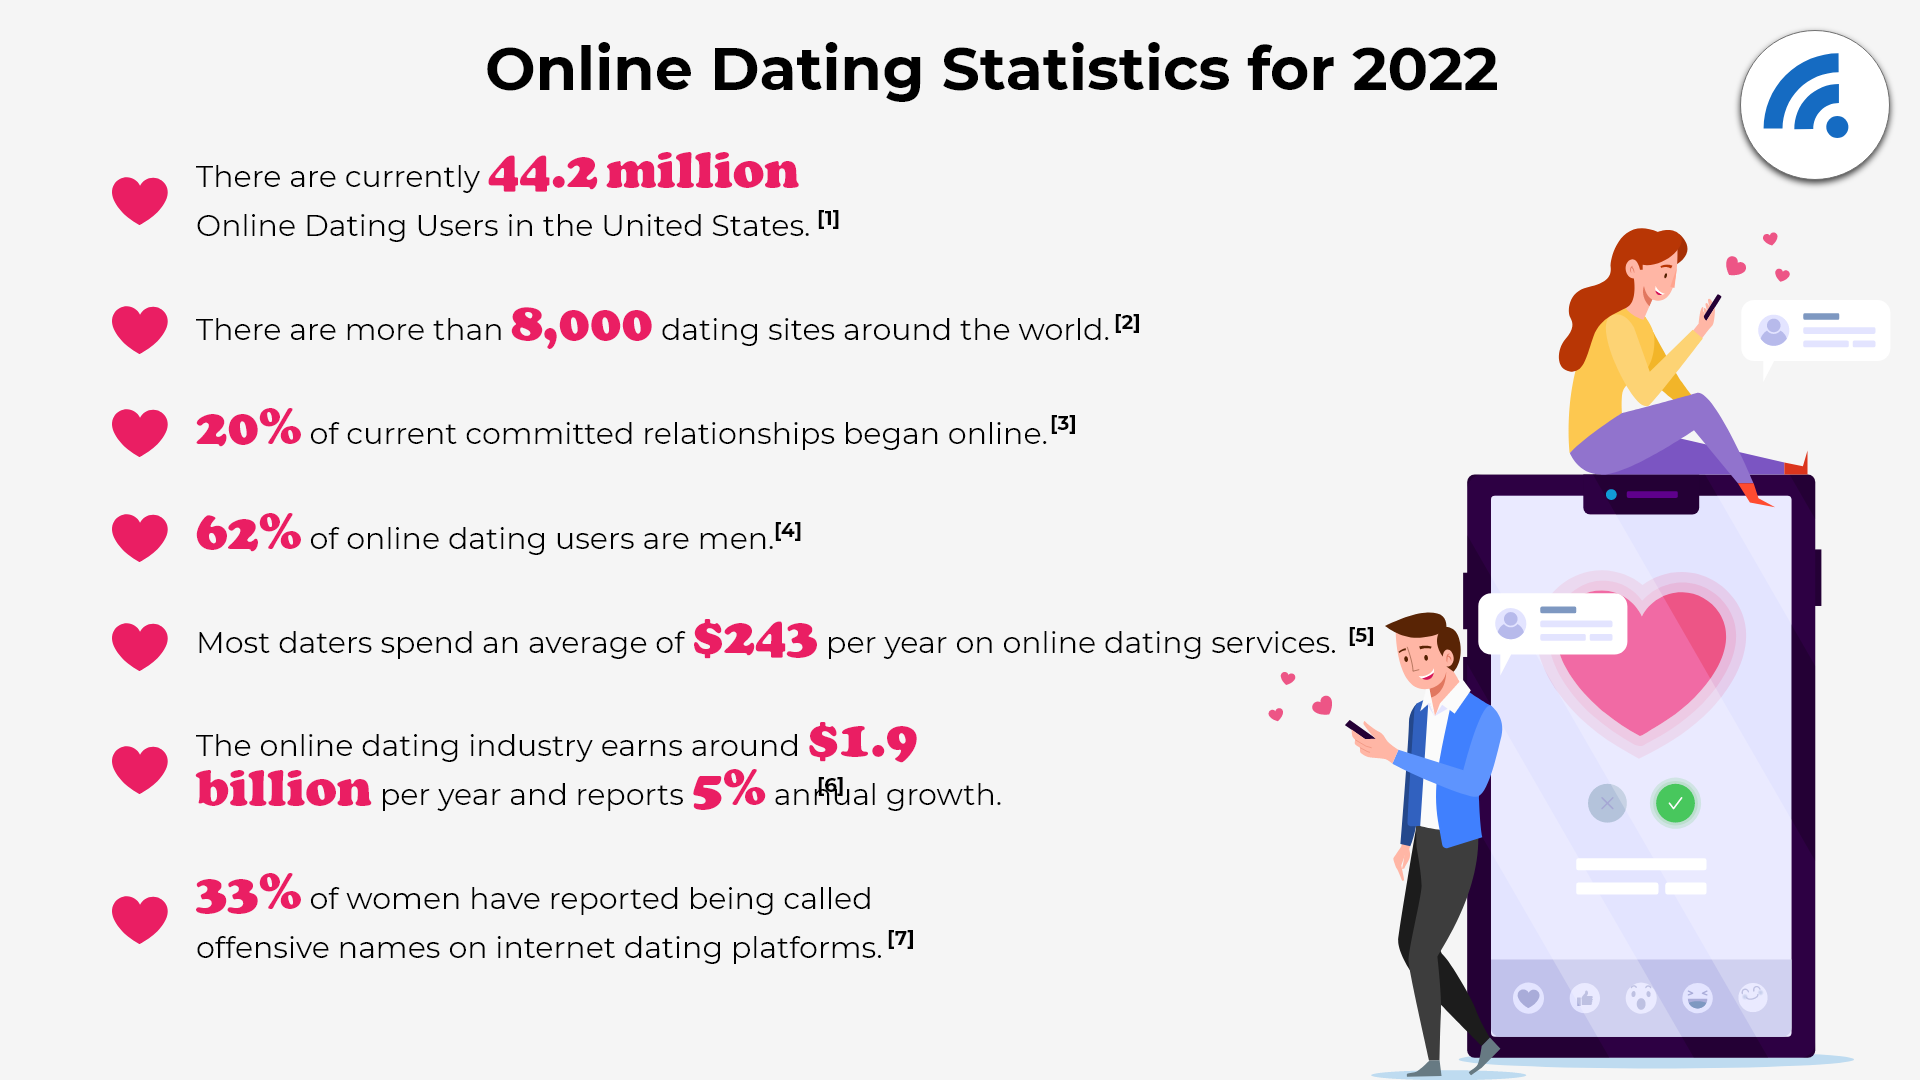 Online dating sources